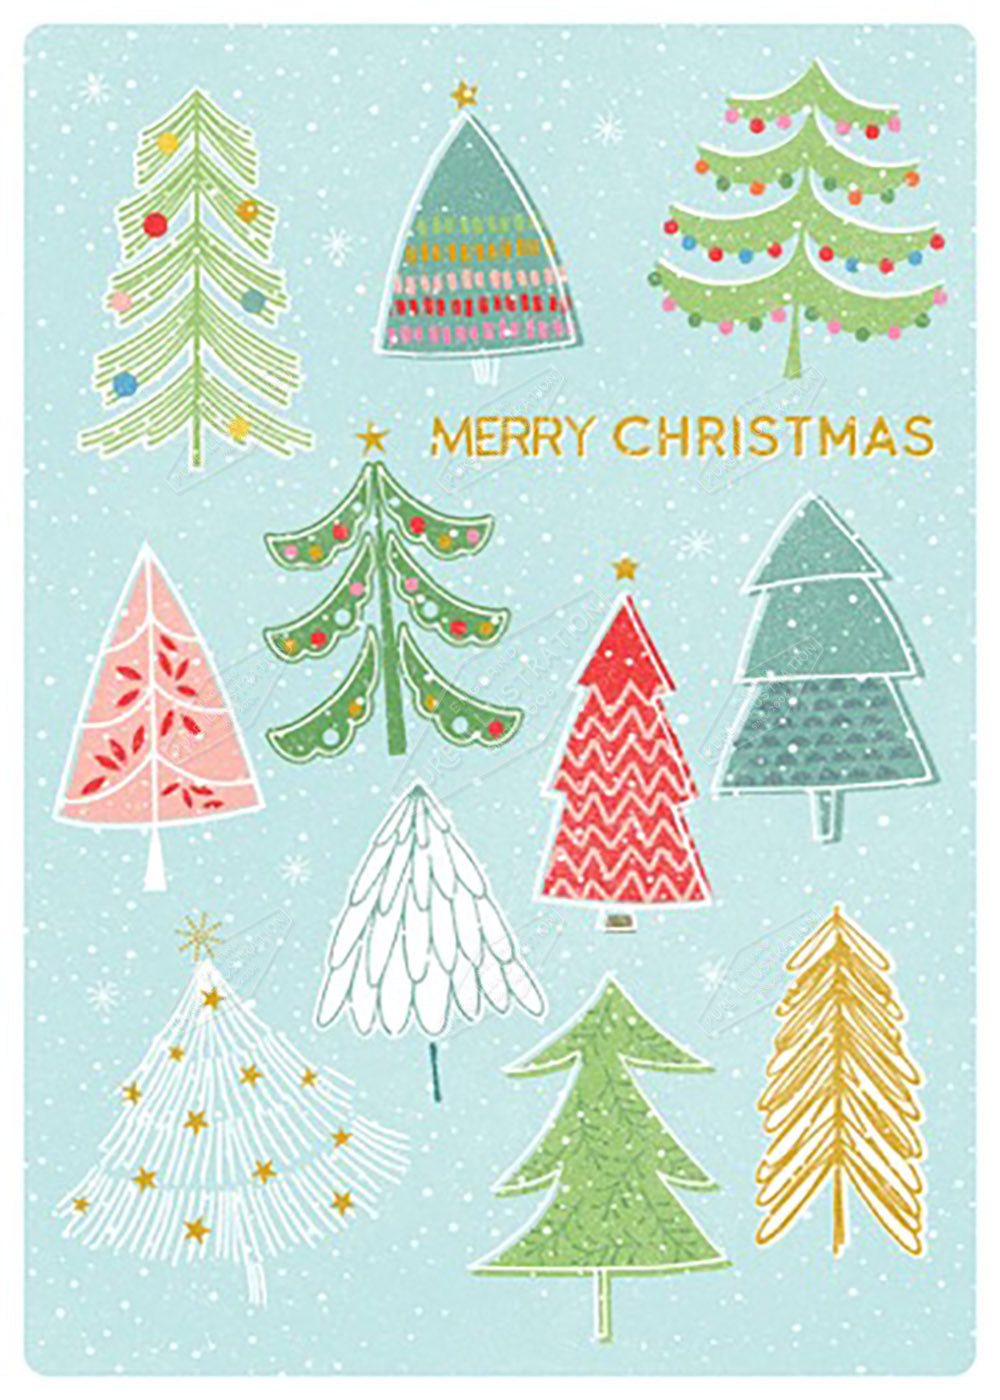 Christmas Tree Design by Gill Eggleston for Pure Art Licensing Agency & Surface Design Studio